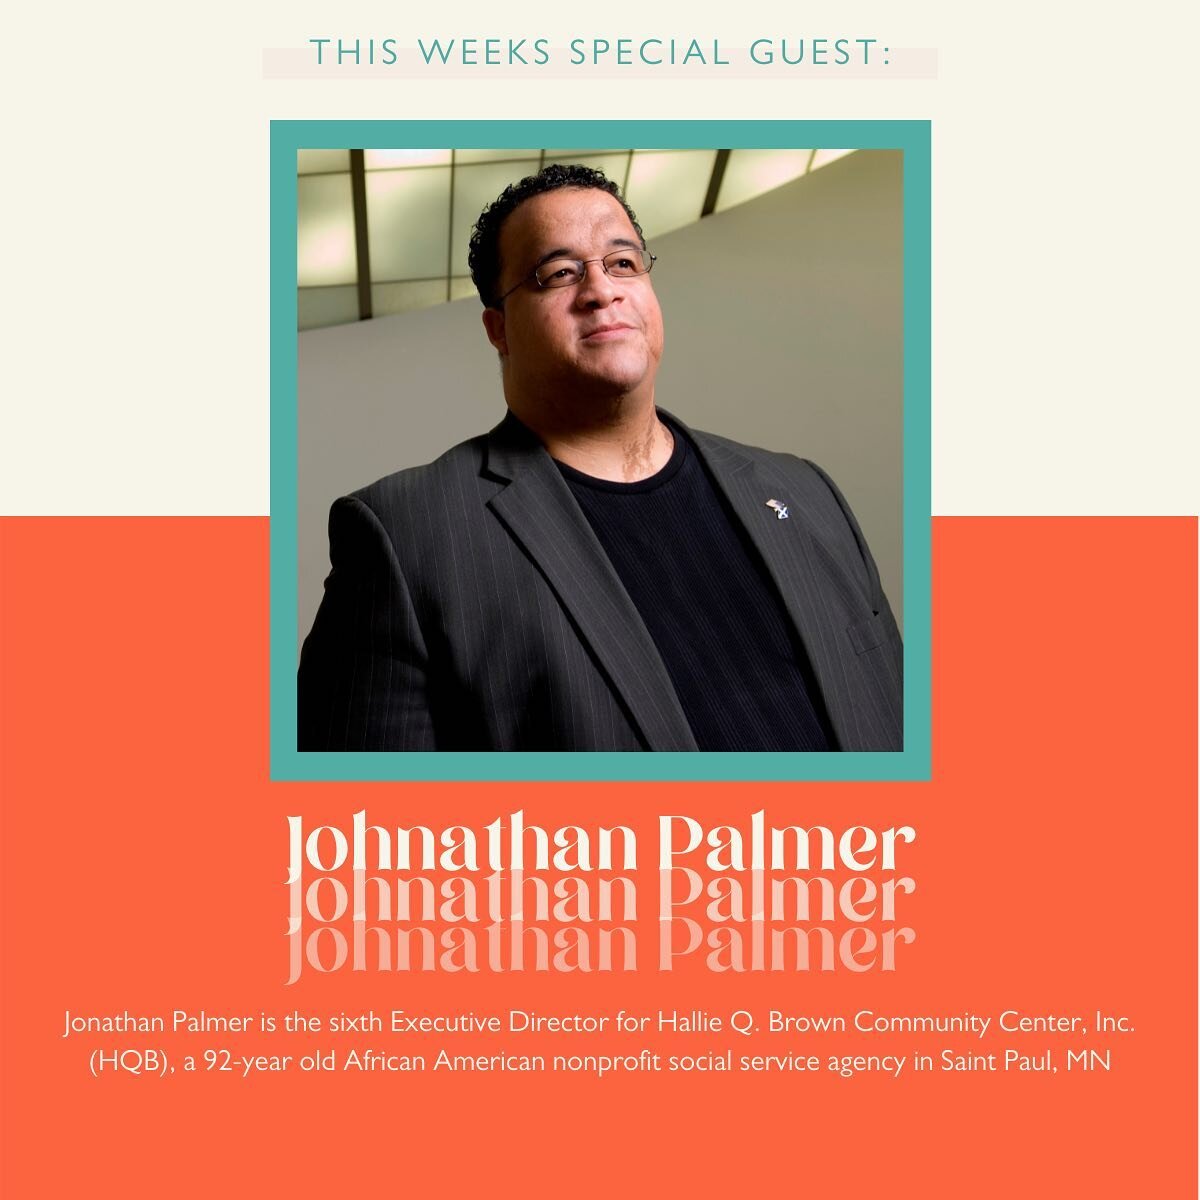 Welcome to Episode 6 of @redefiningvolunteerism, Nourishing the City. 

Today we have Jonathan Palmer joining us. Jonathan is the Executive Director of @hallieqbrownctr, a 92-year old African American nonprofit social service agency in Saint Paul, MN